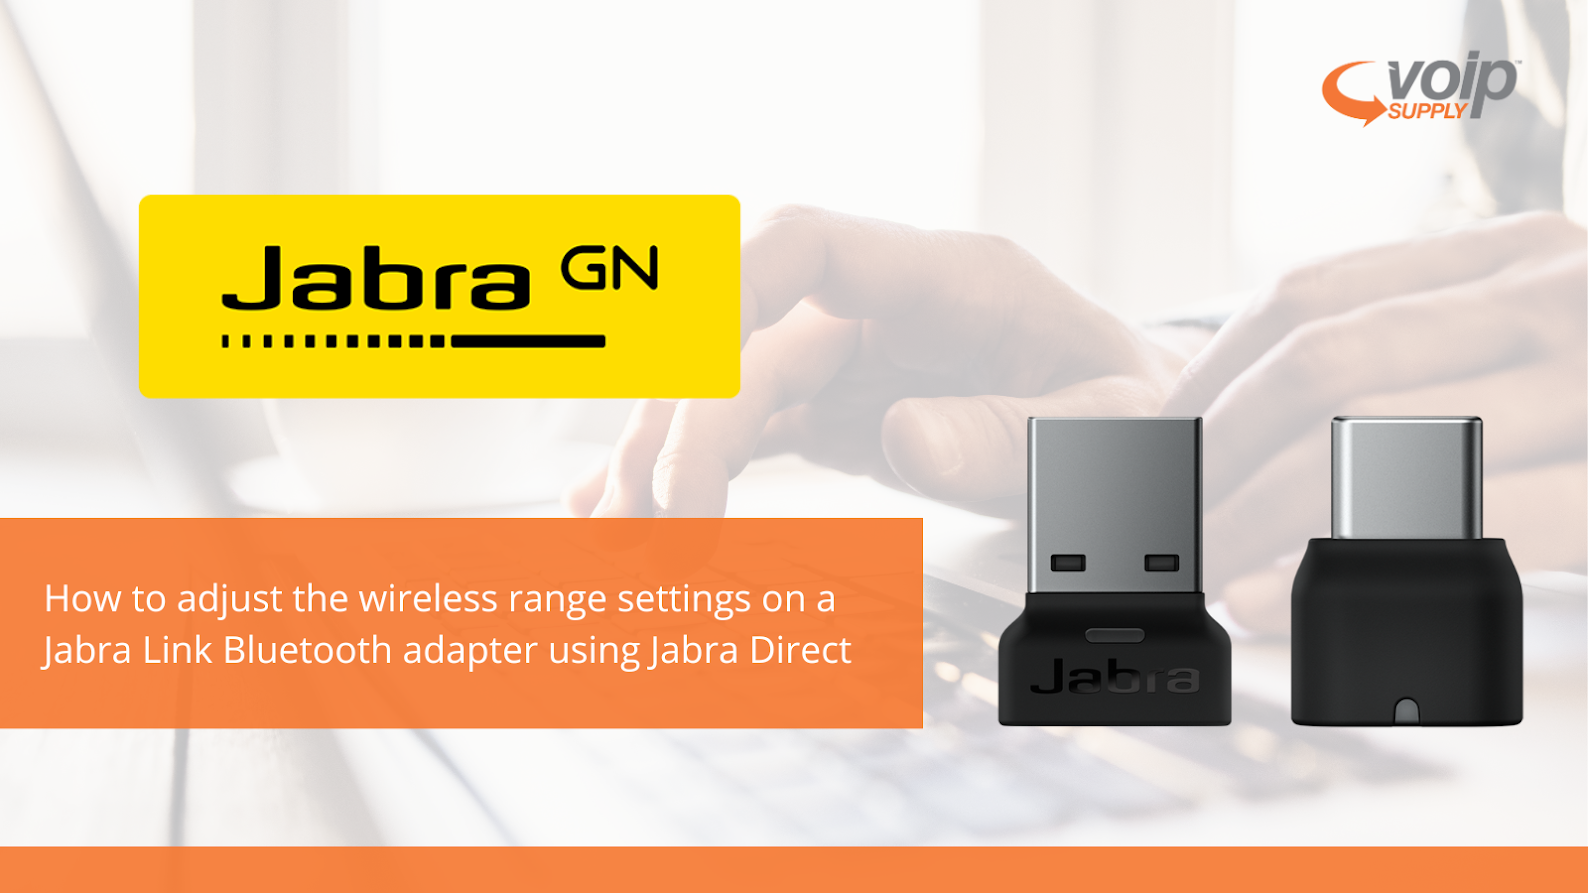 How to adjust the wireless range settings on a Jabra Link